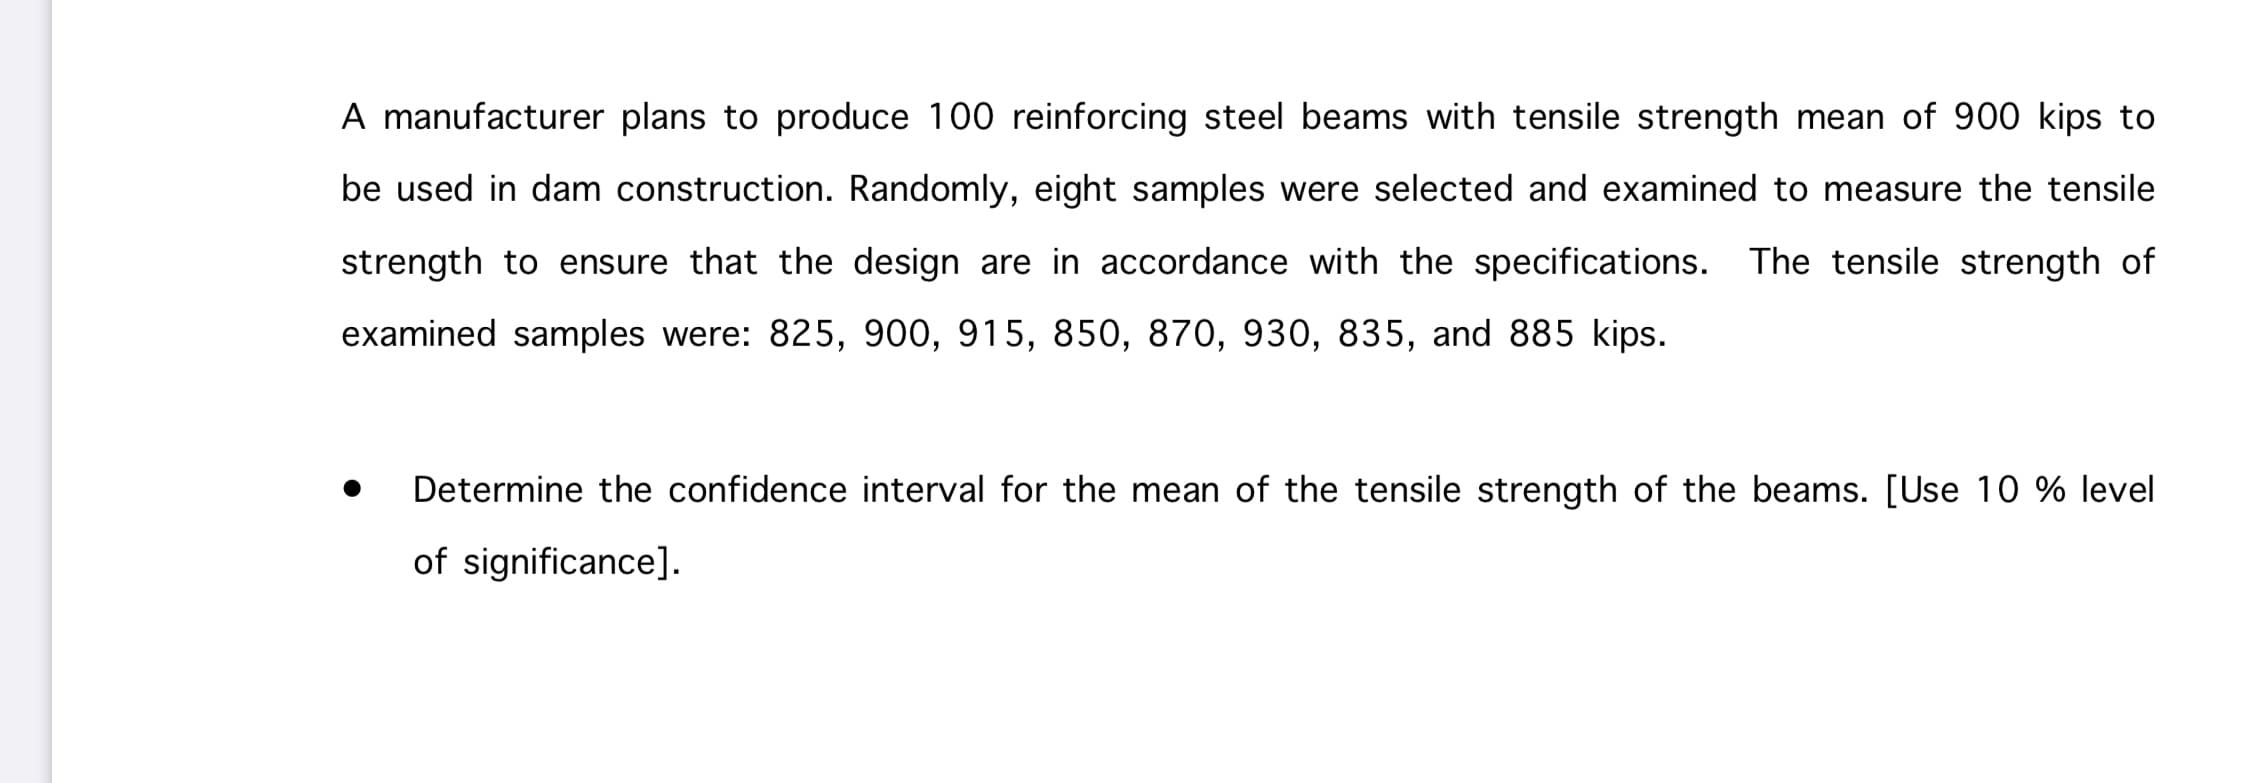 A manufacturer plans to produce 100 reinforcing steel beams with tensile strength mean of 900 kips to
be used in dam construction. Randomly, eight samples were selected and examined to measure the tensile
strength to ensure that the design are in accordance with the specifications. The tensile strength of
examined samples were: 825, 900, 915, 850, 870, 930, 835, and 885 kips.
Determine the confidence interval for the mean of the tensile strength of the beams. [Use 10 % level
of significance].
